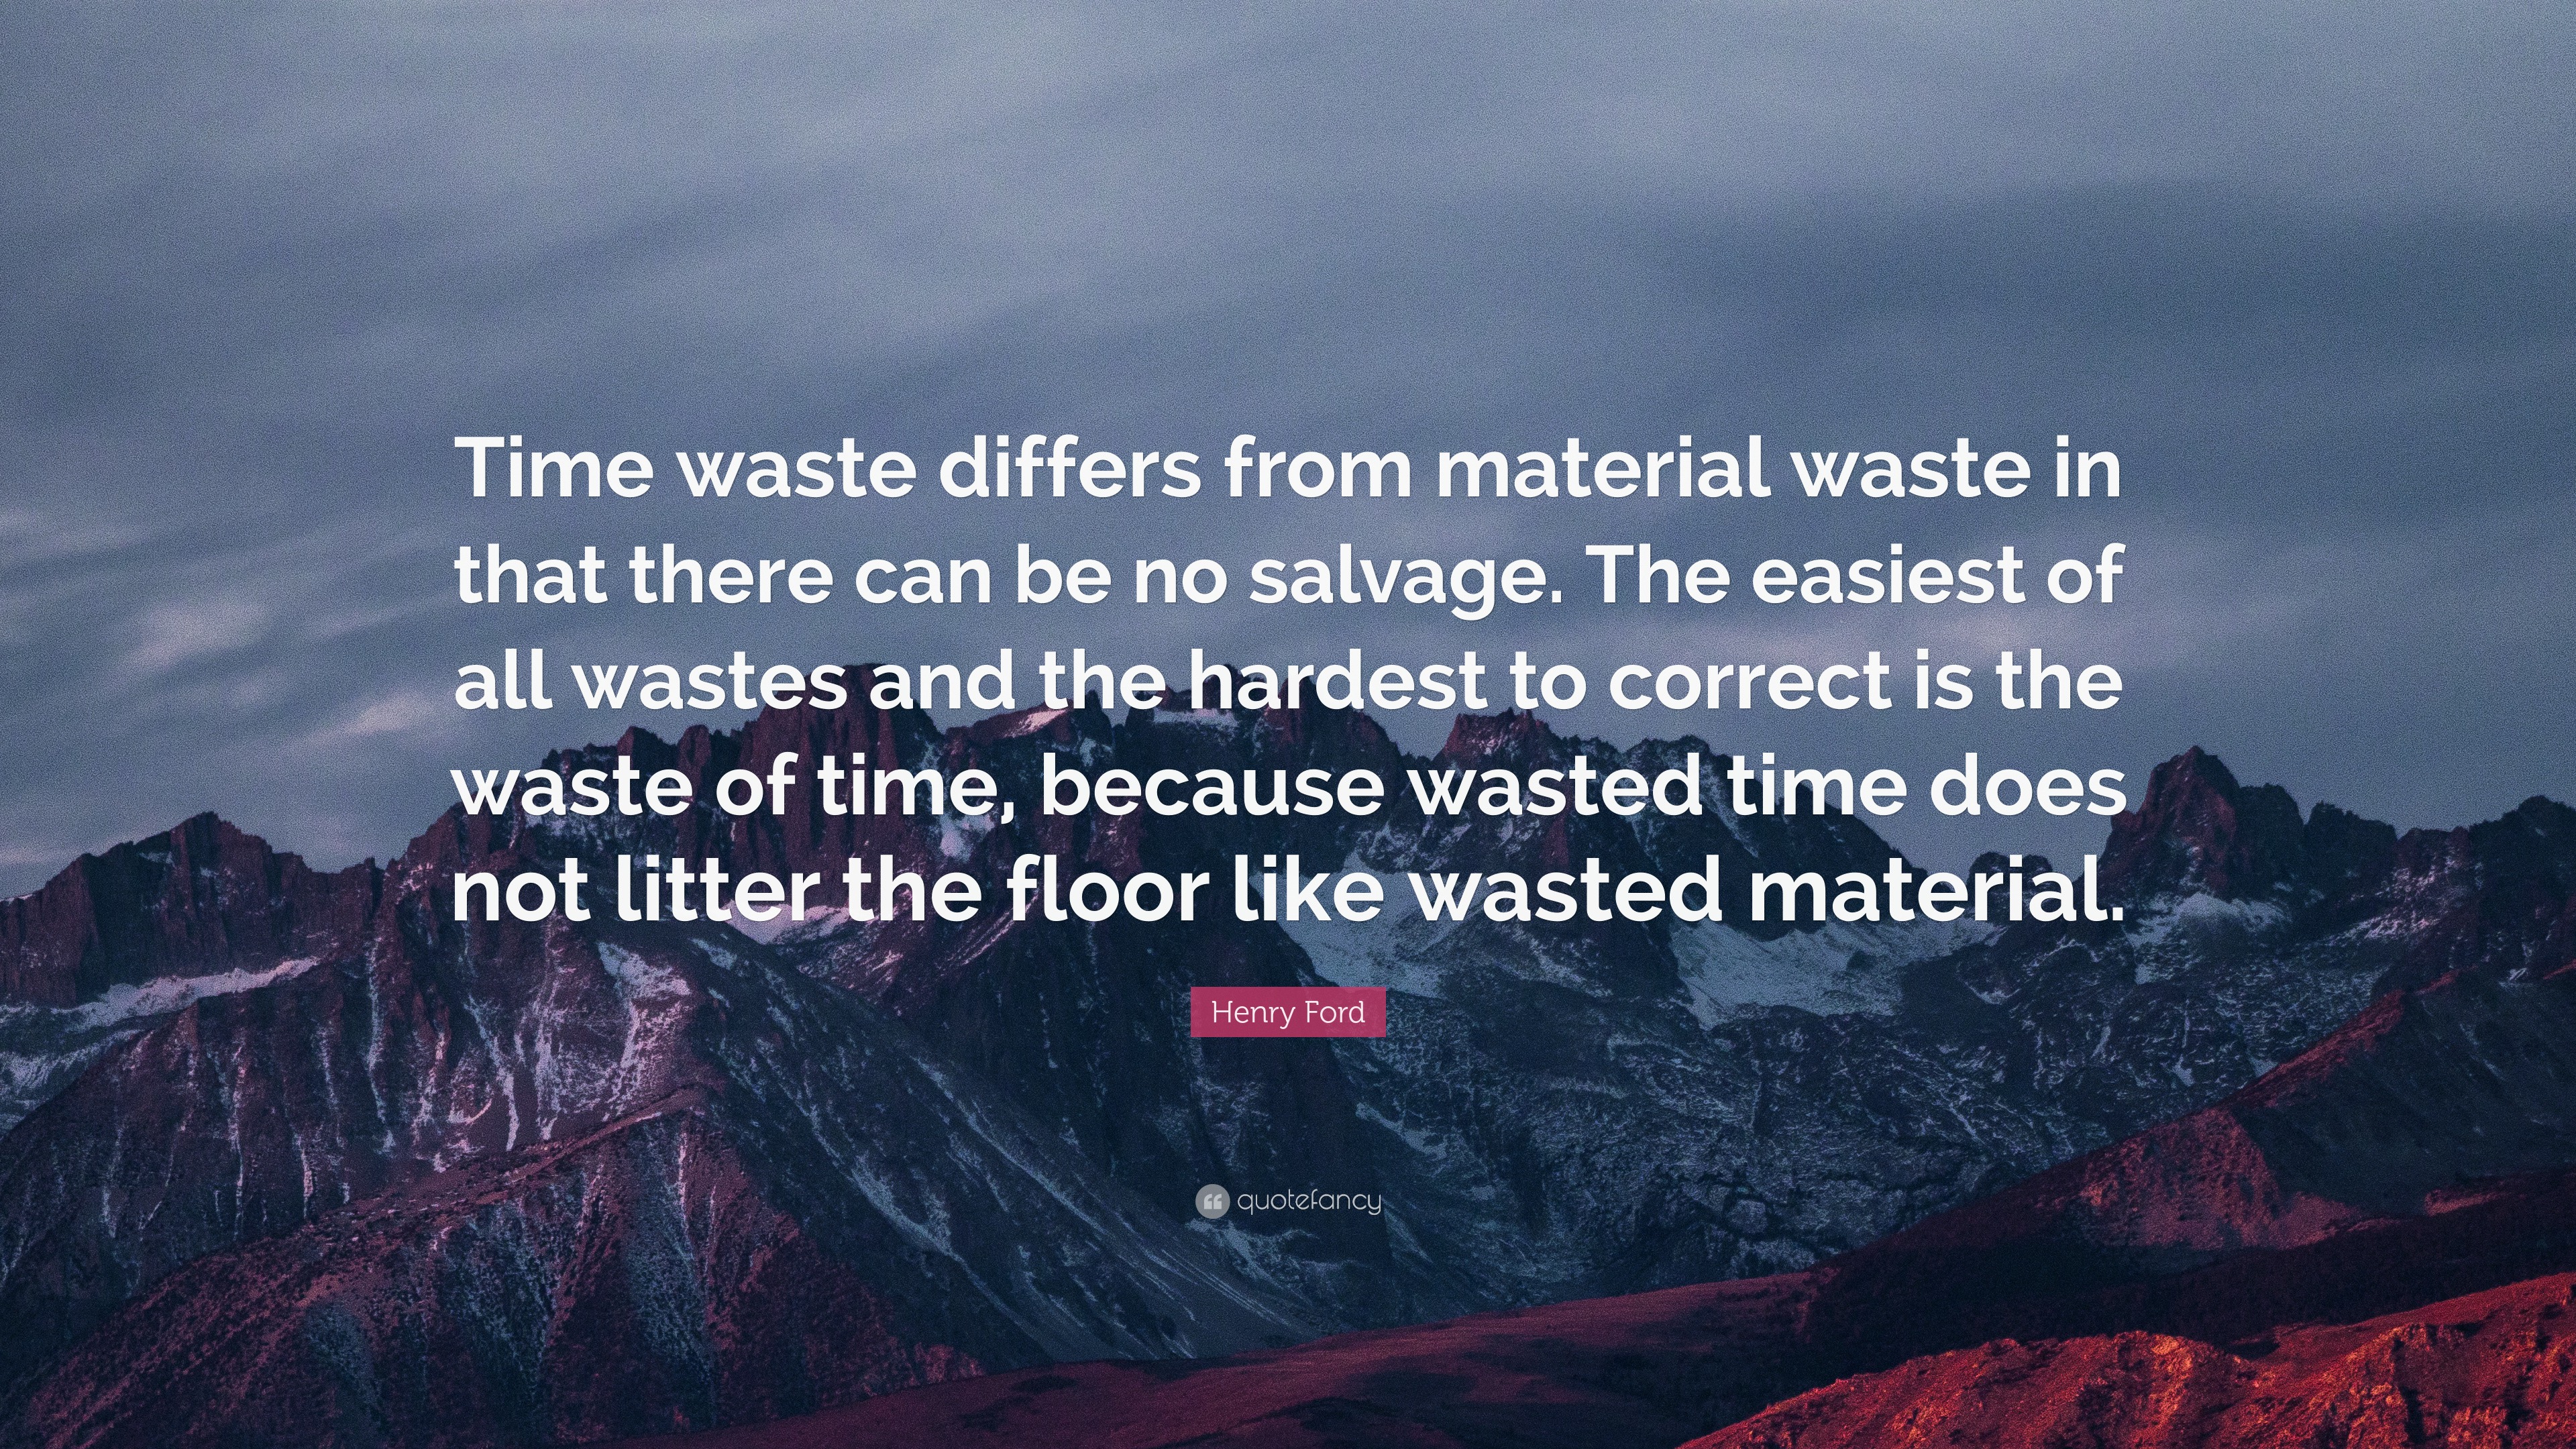 Henry Ford Quote “Time waste differs from material waste in that there can be